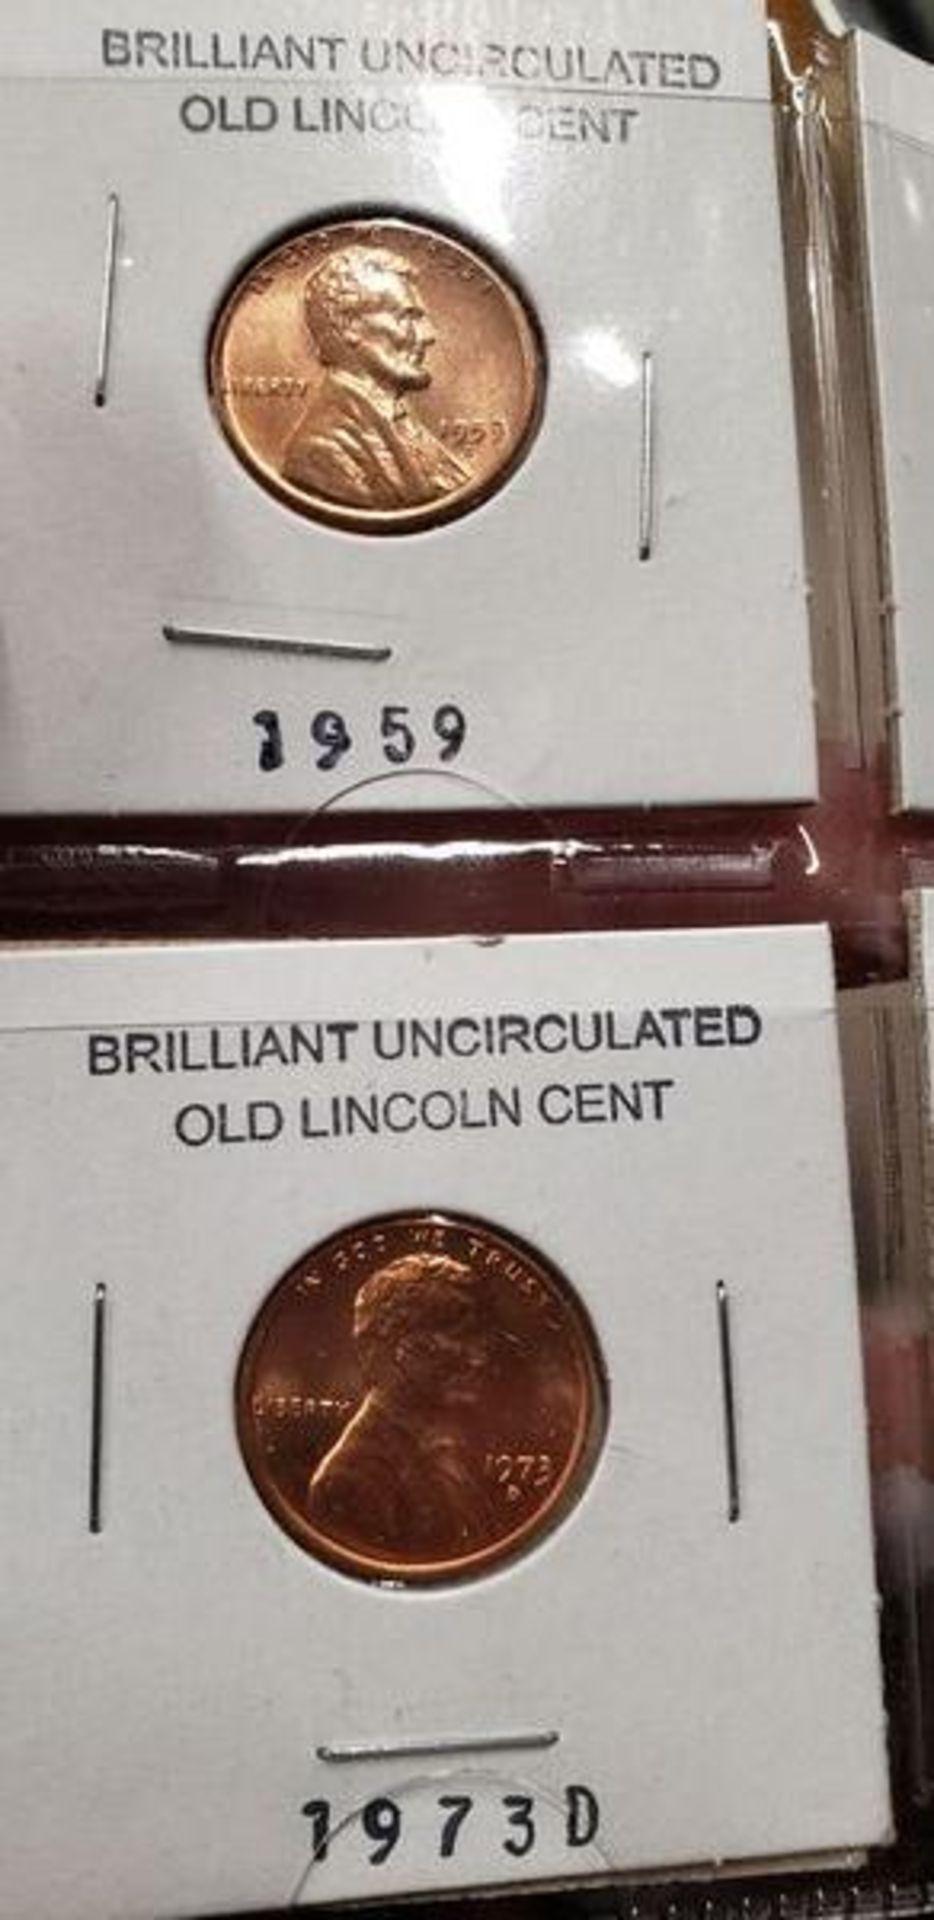 LOT OF 8 BRILLIANT UNCIRCULATED OLD LINCOLN CENTS - Image 5 of 9